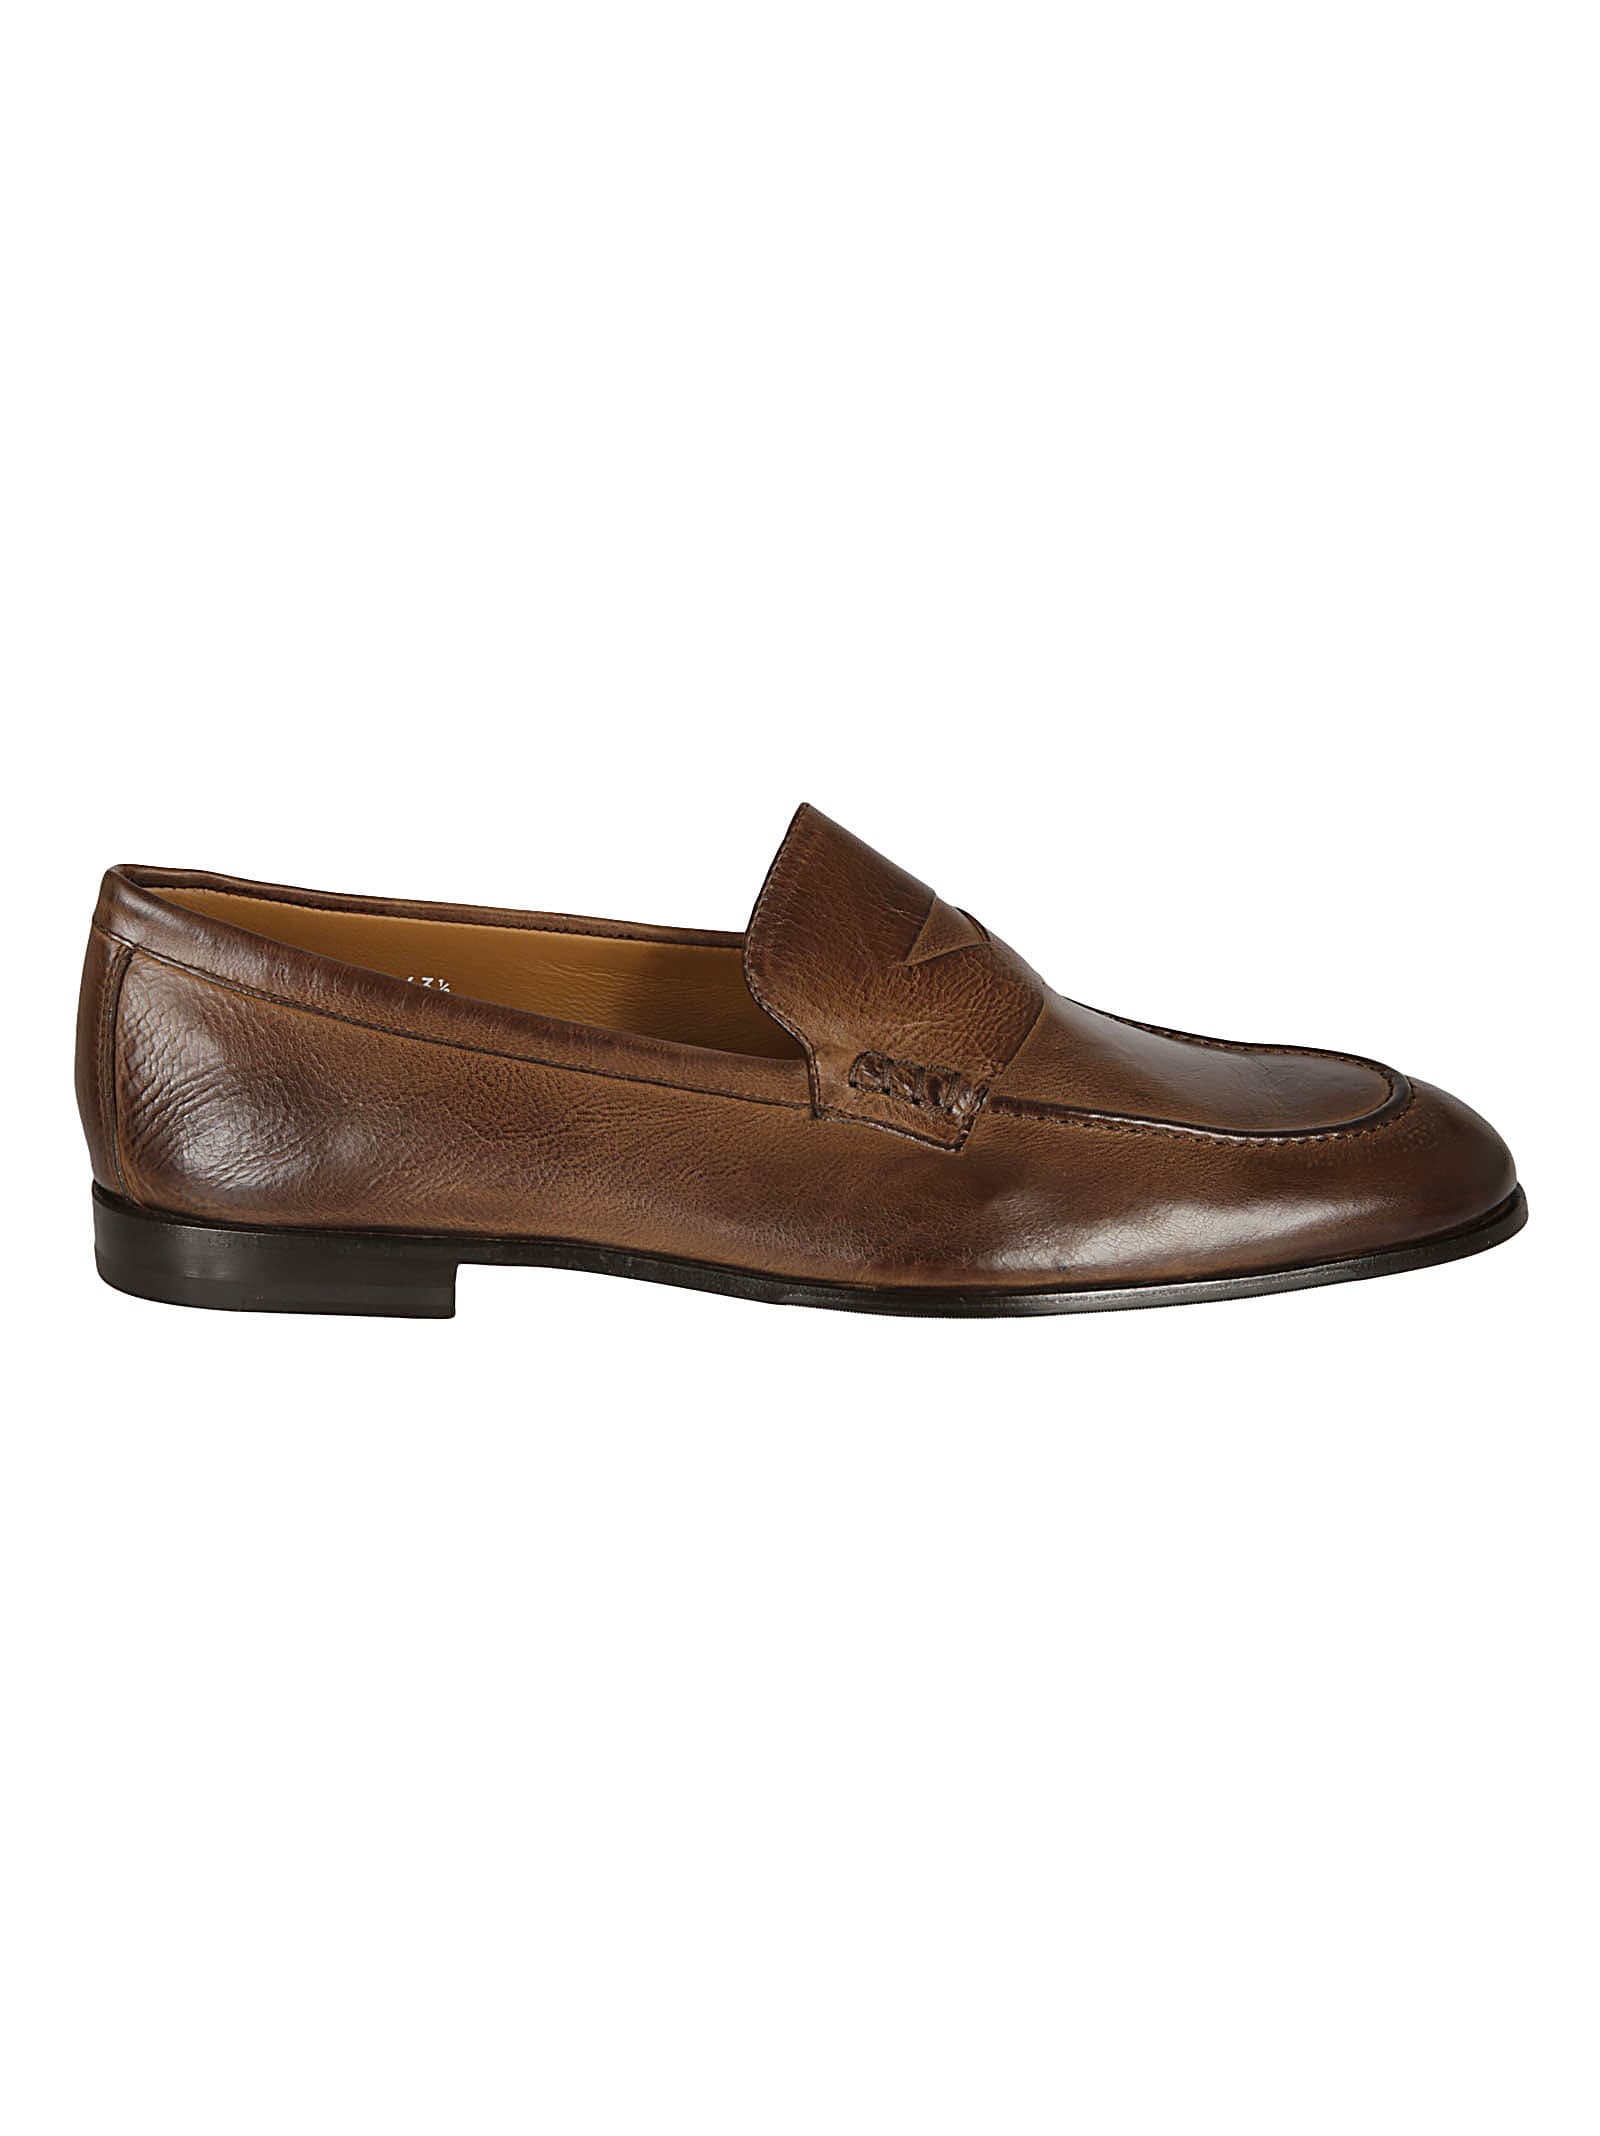 Doucal's Classic Slip-on Loafers